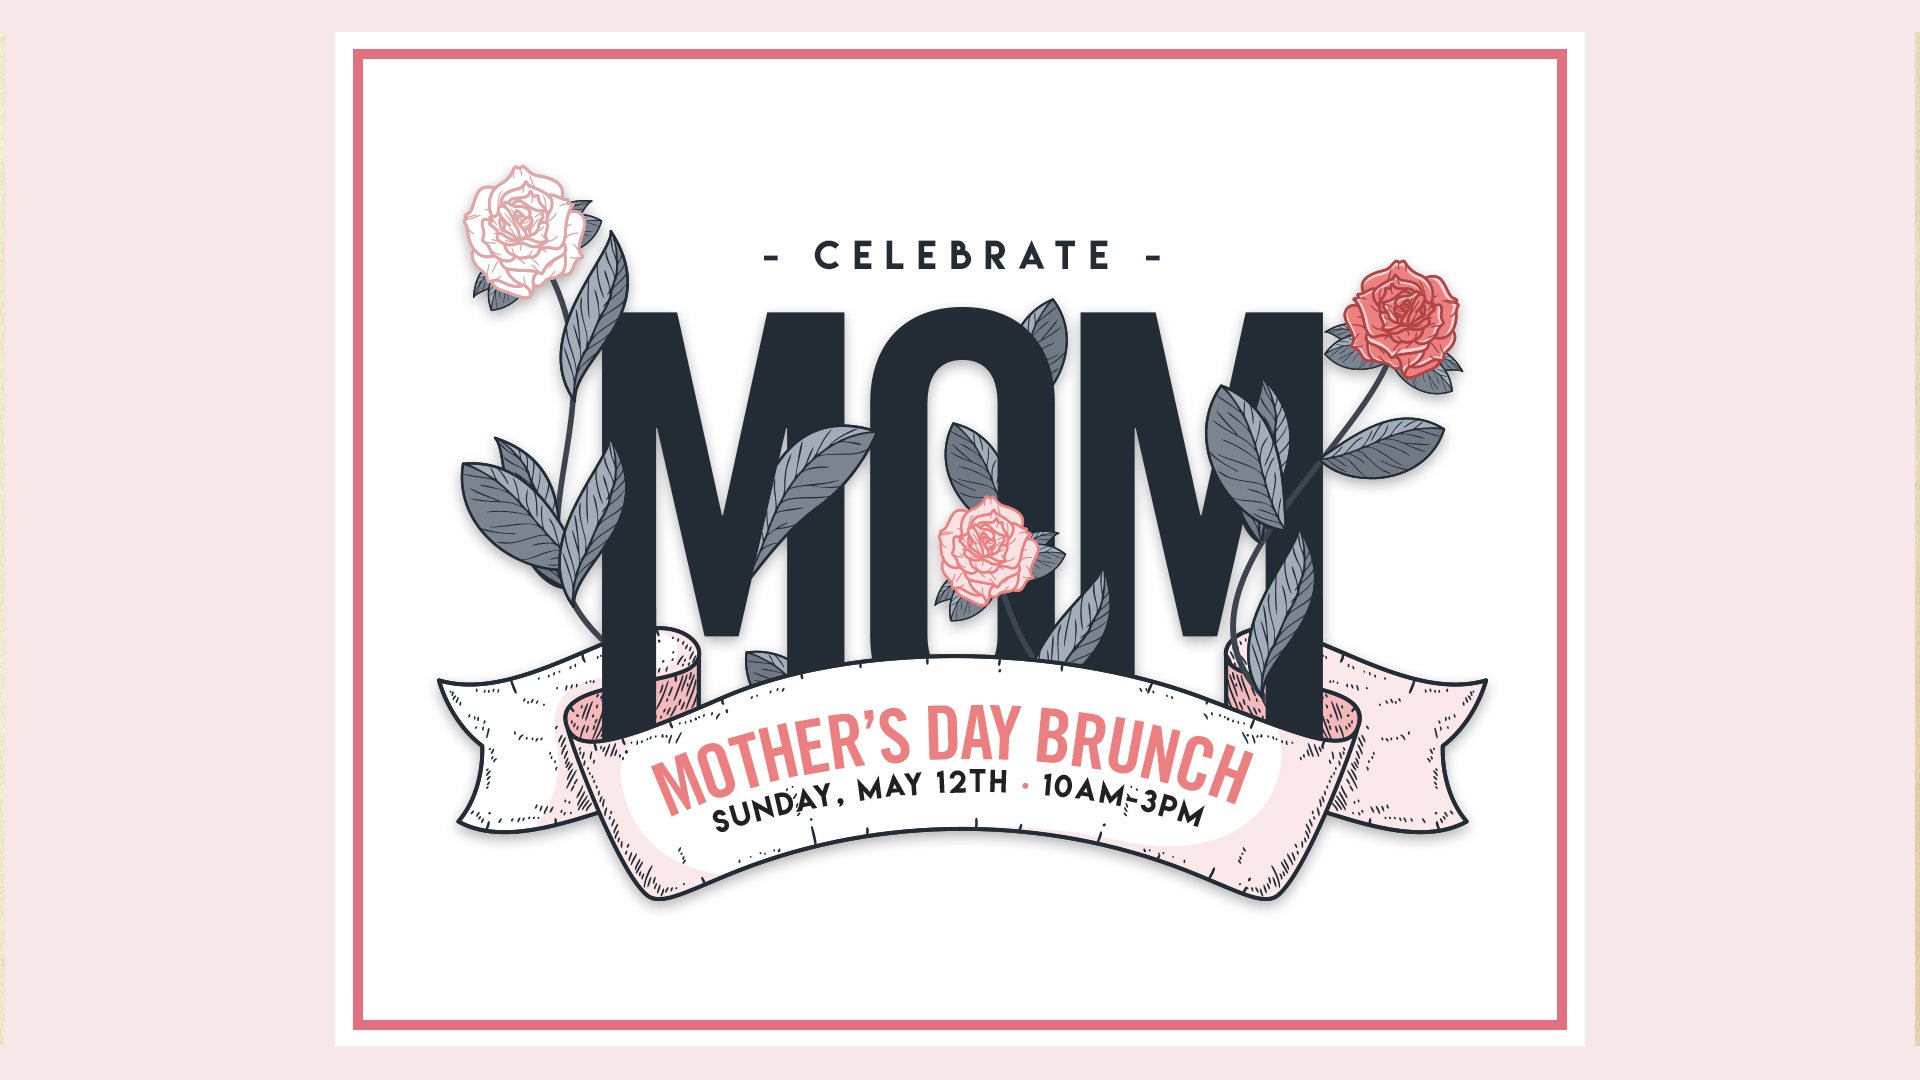 Mothers Day Brunch at CRAFT